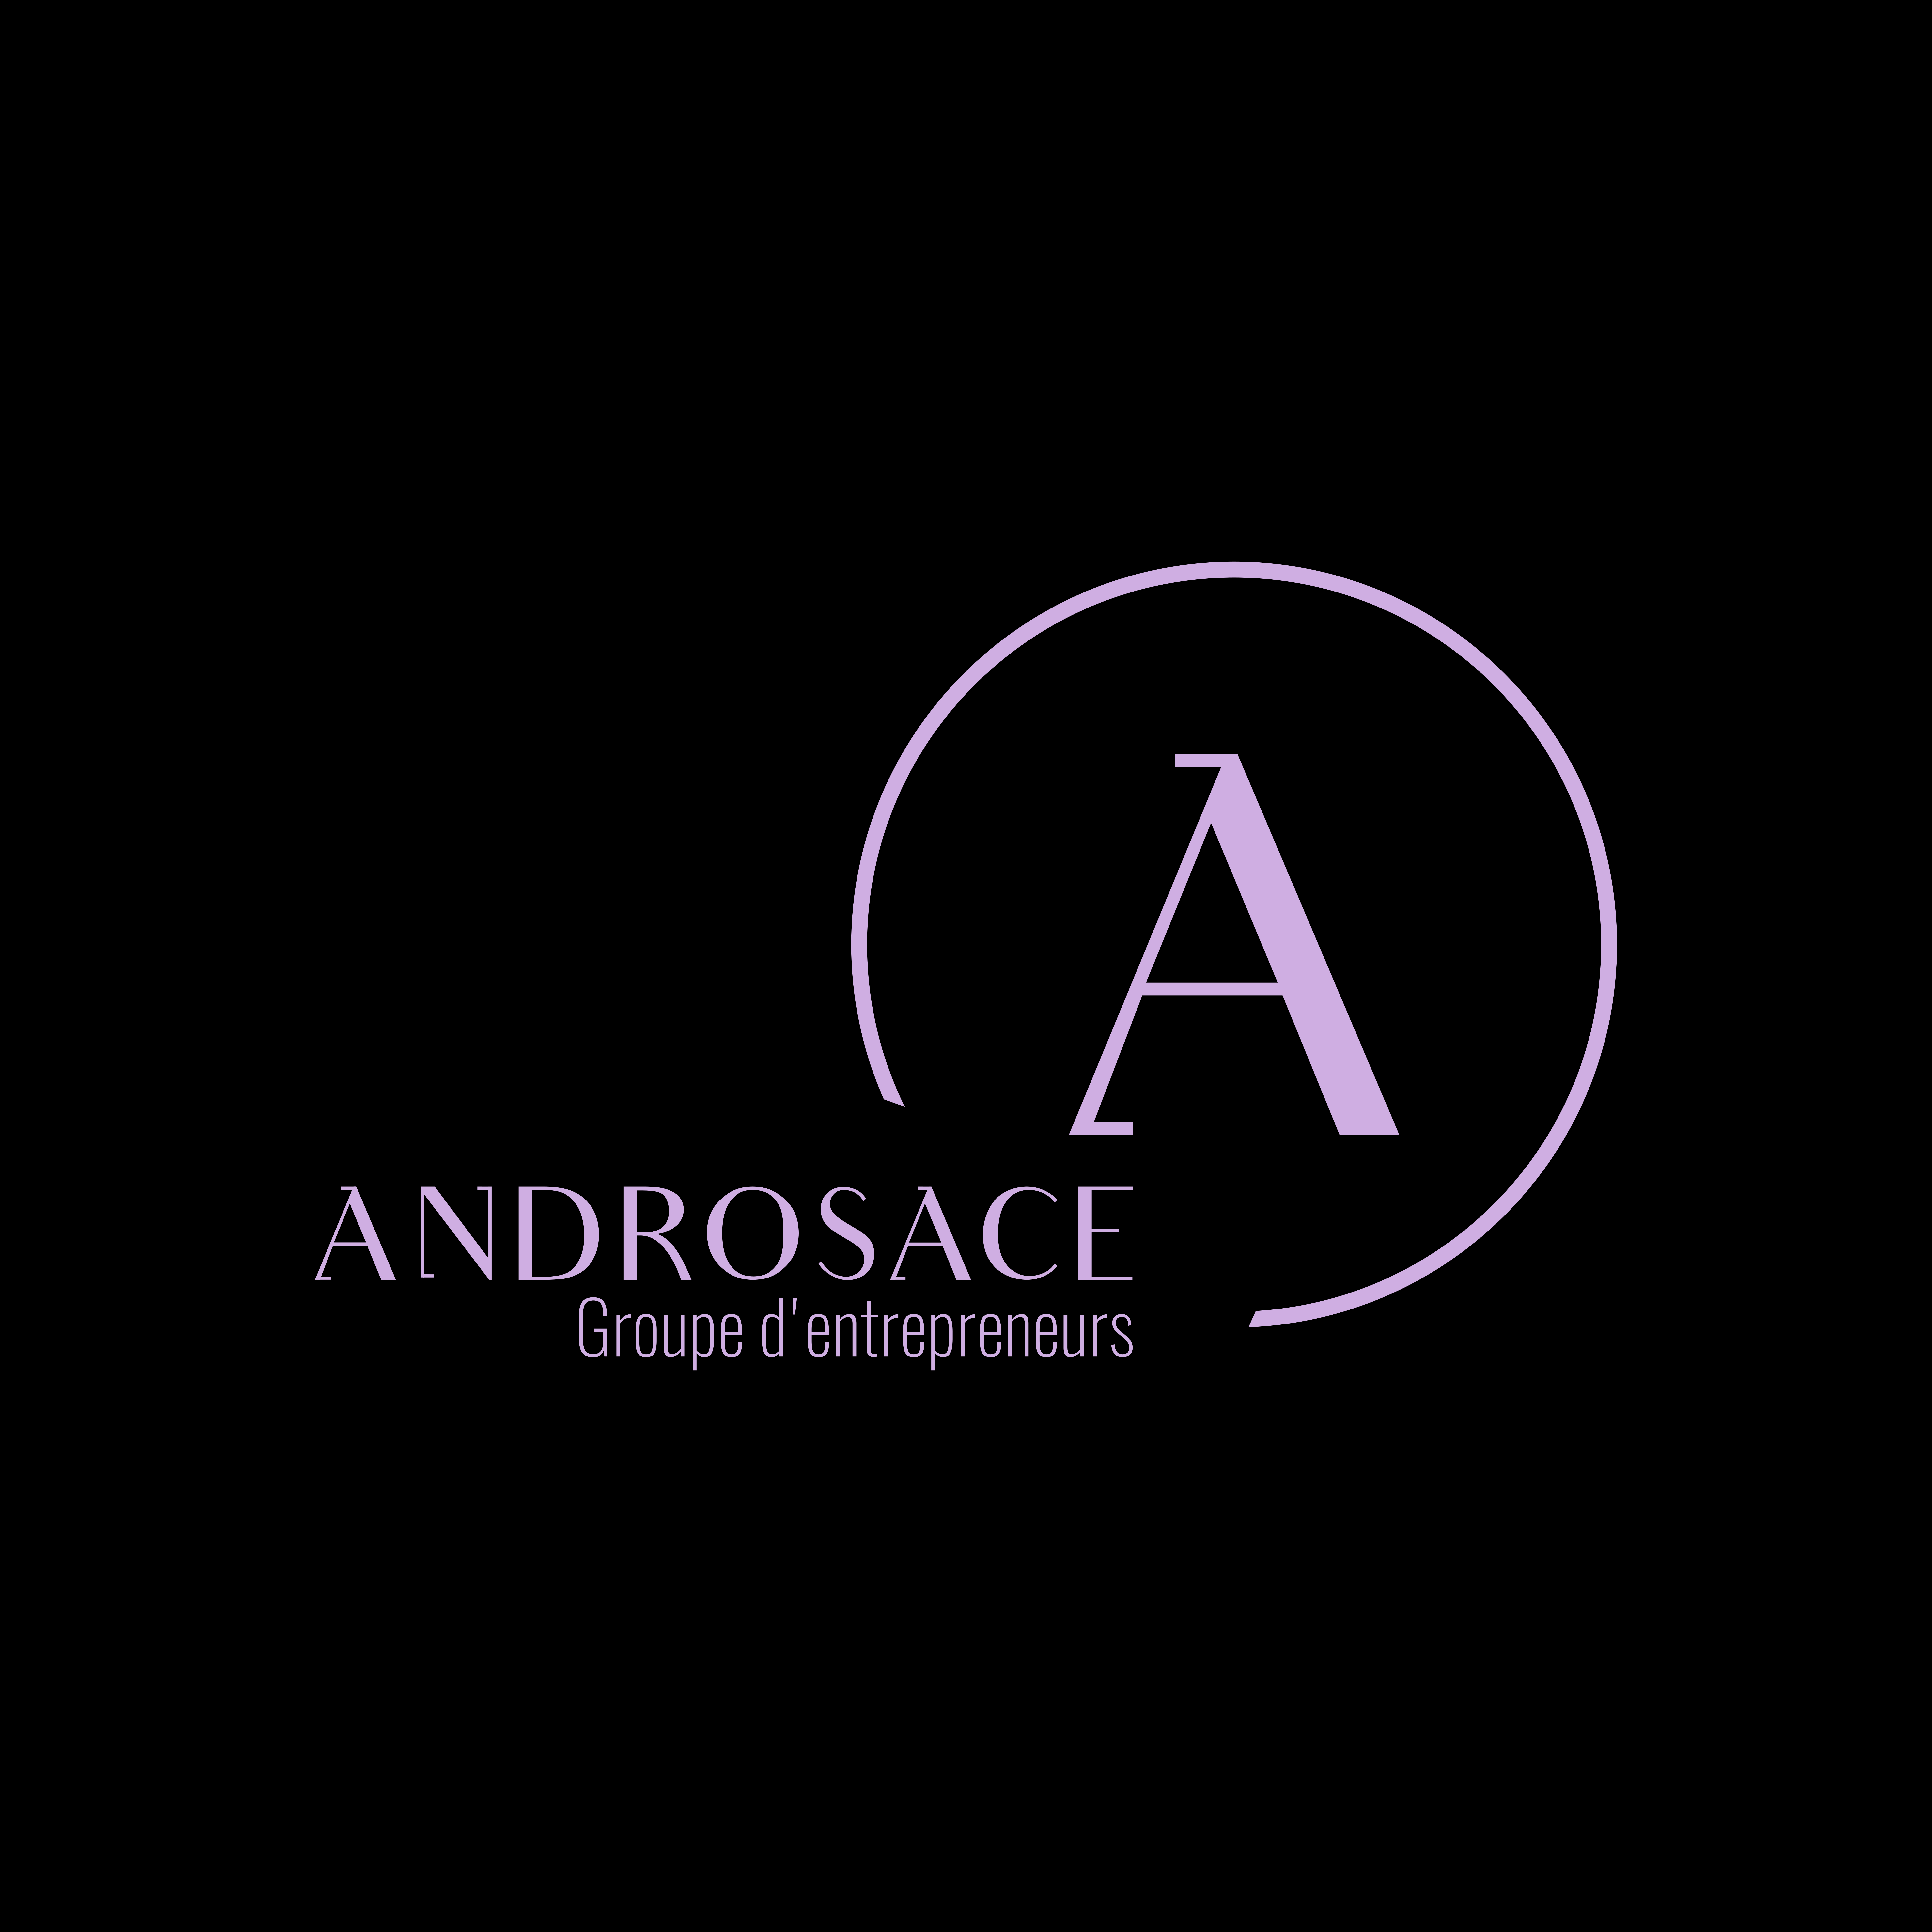 Androsace